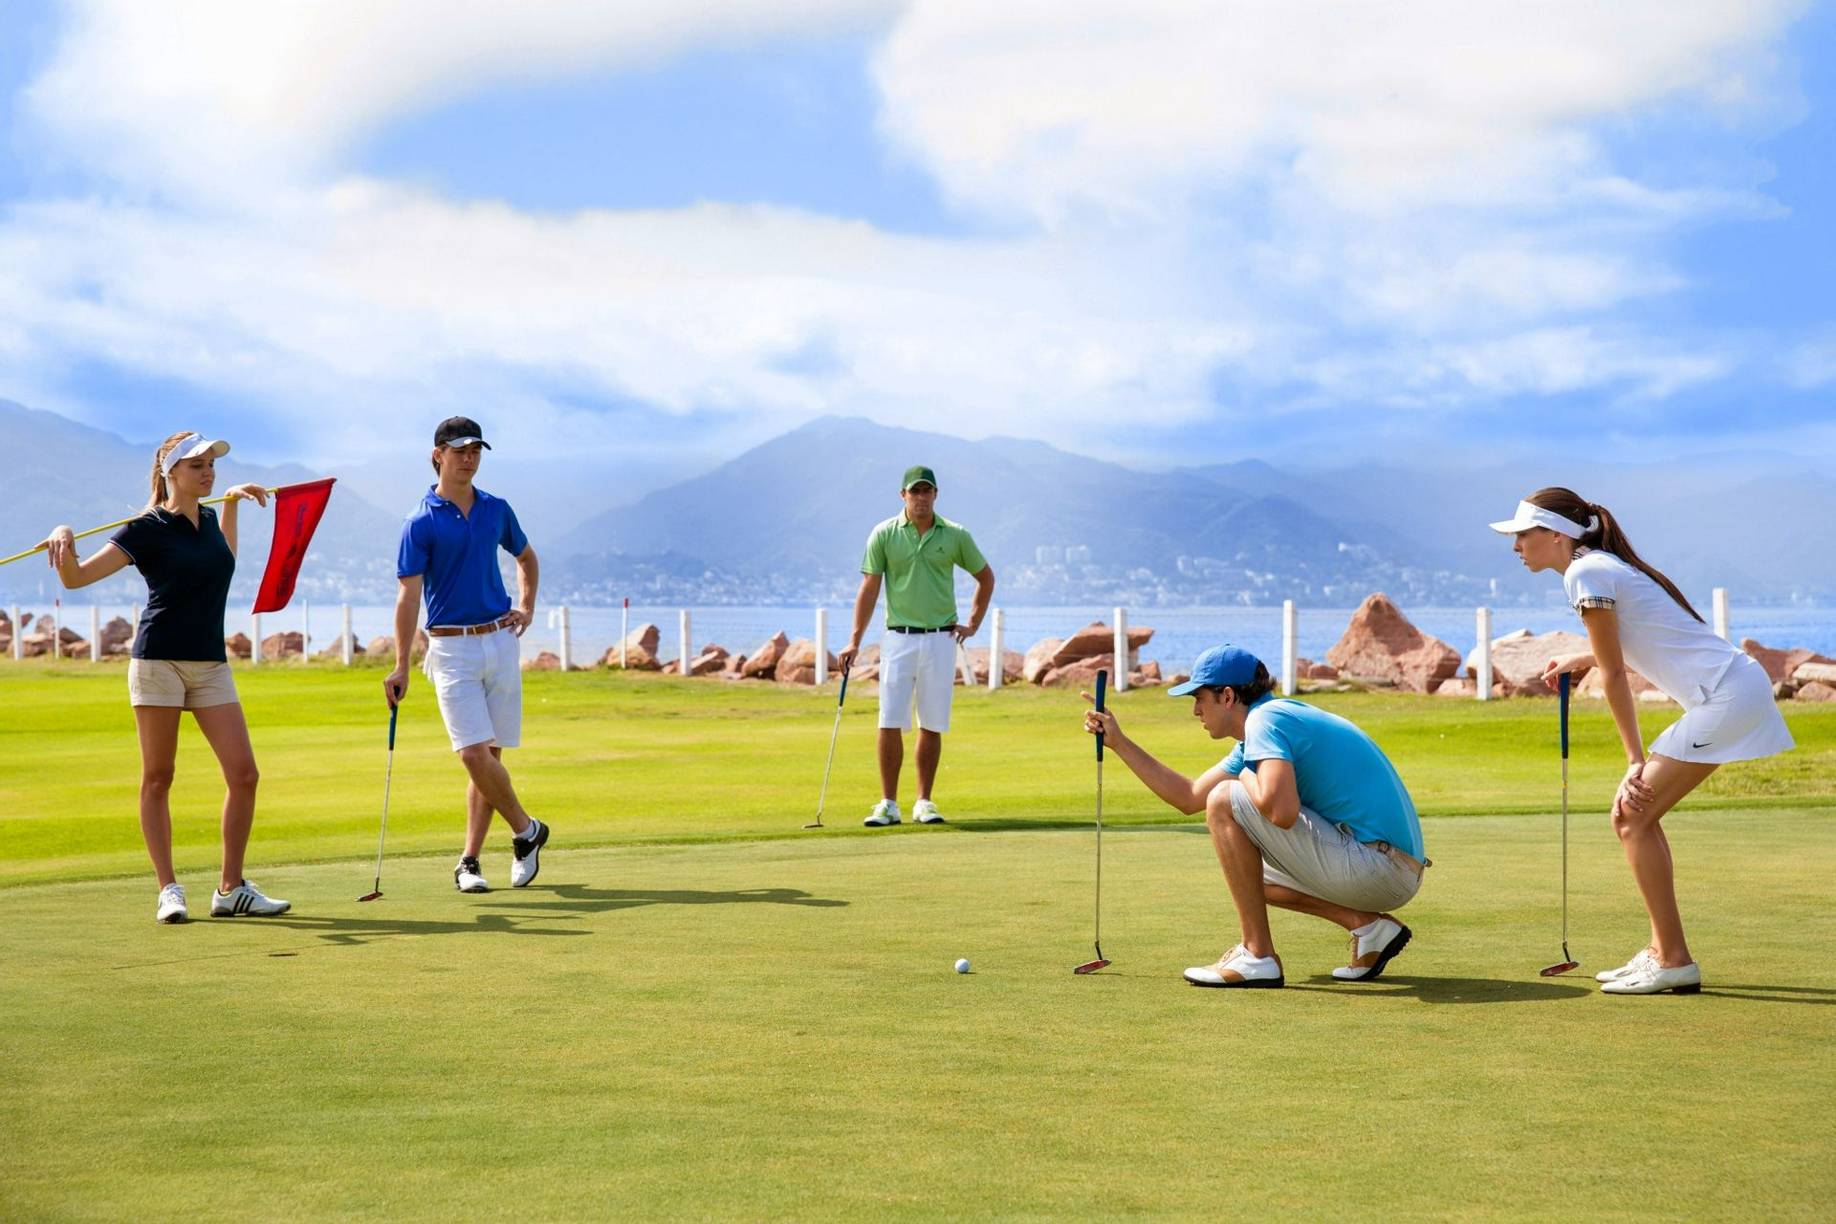 Grand Velas golf and networking